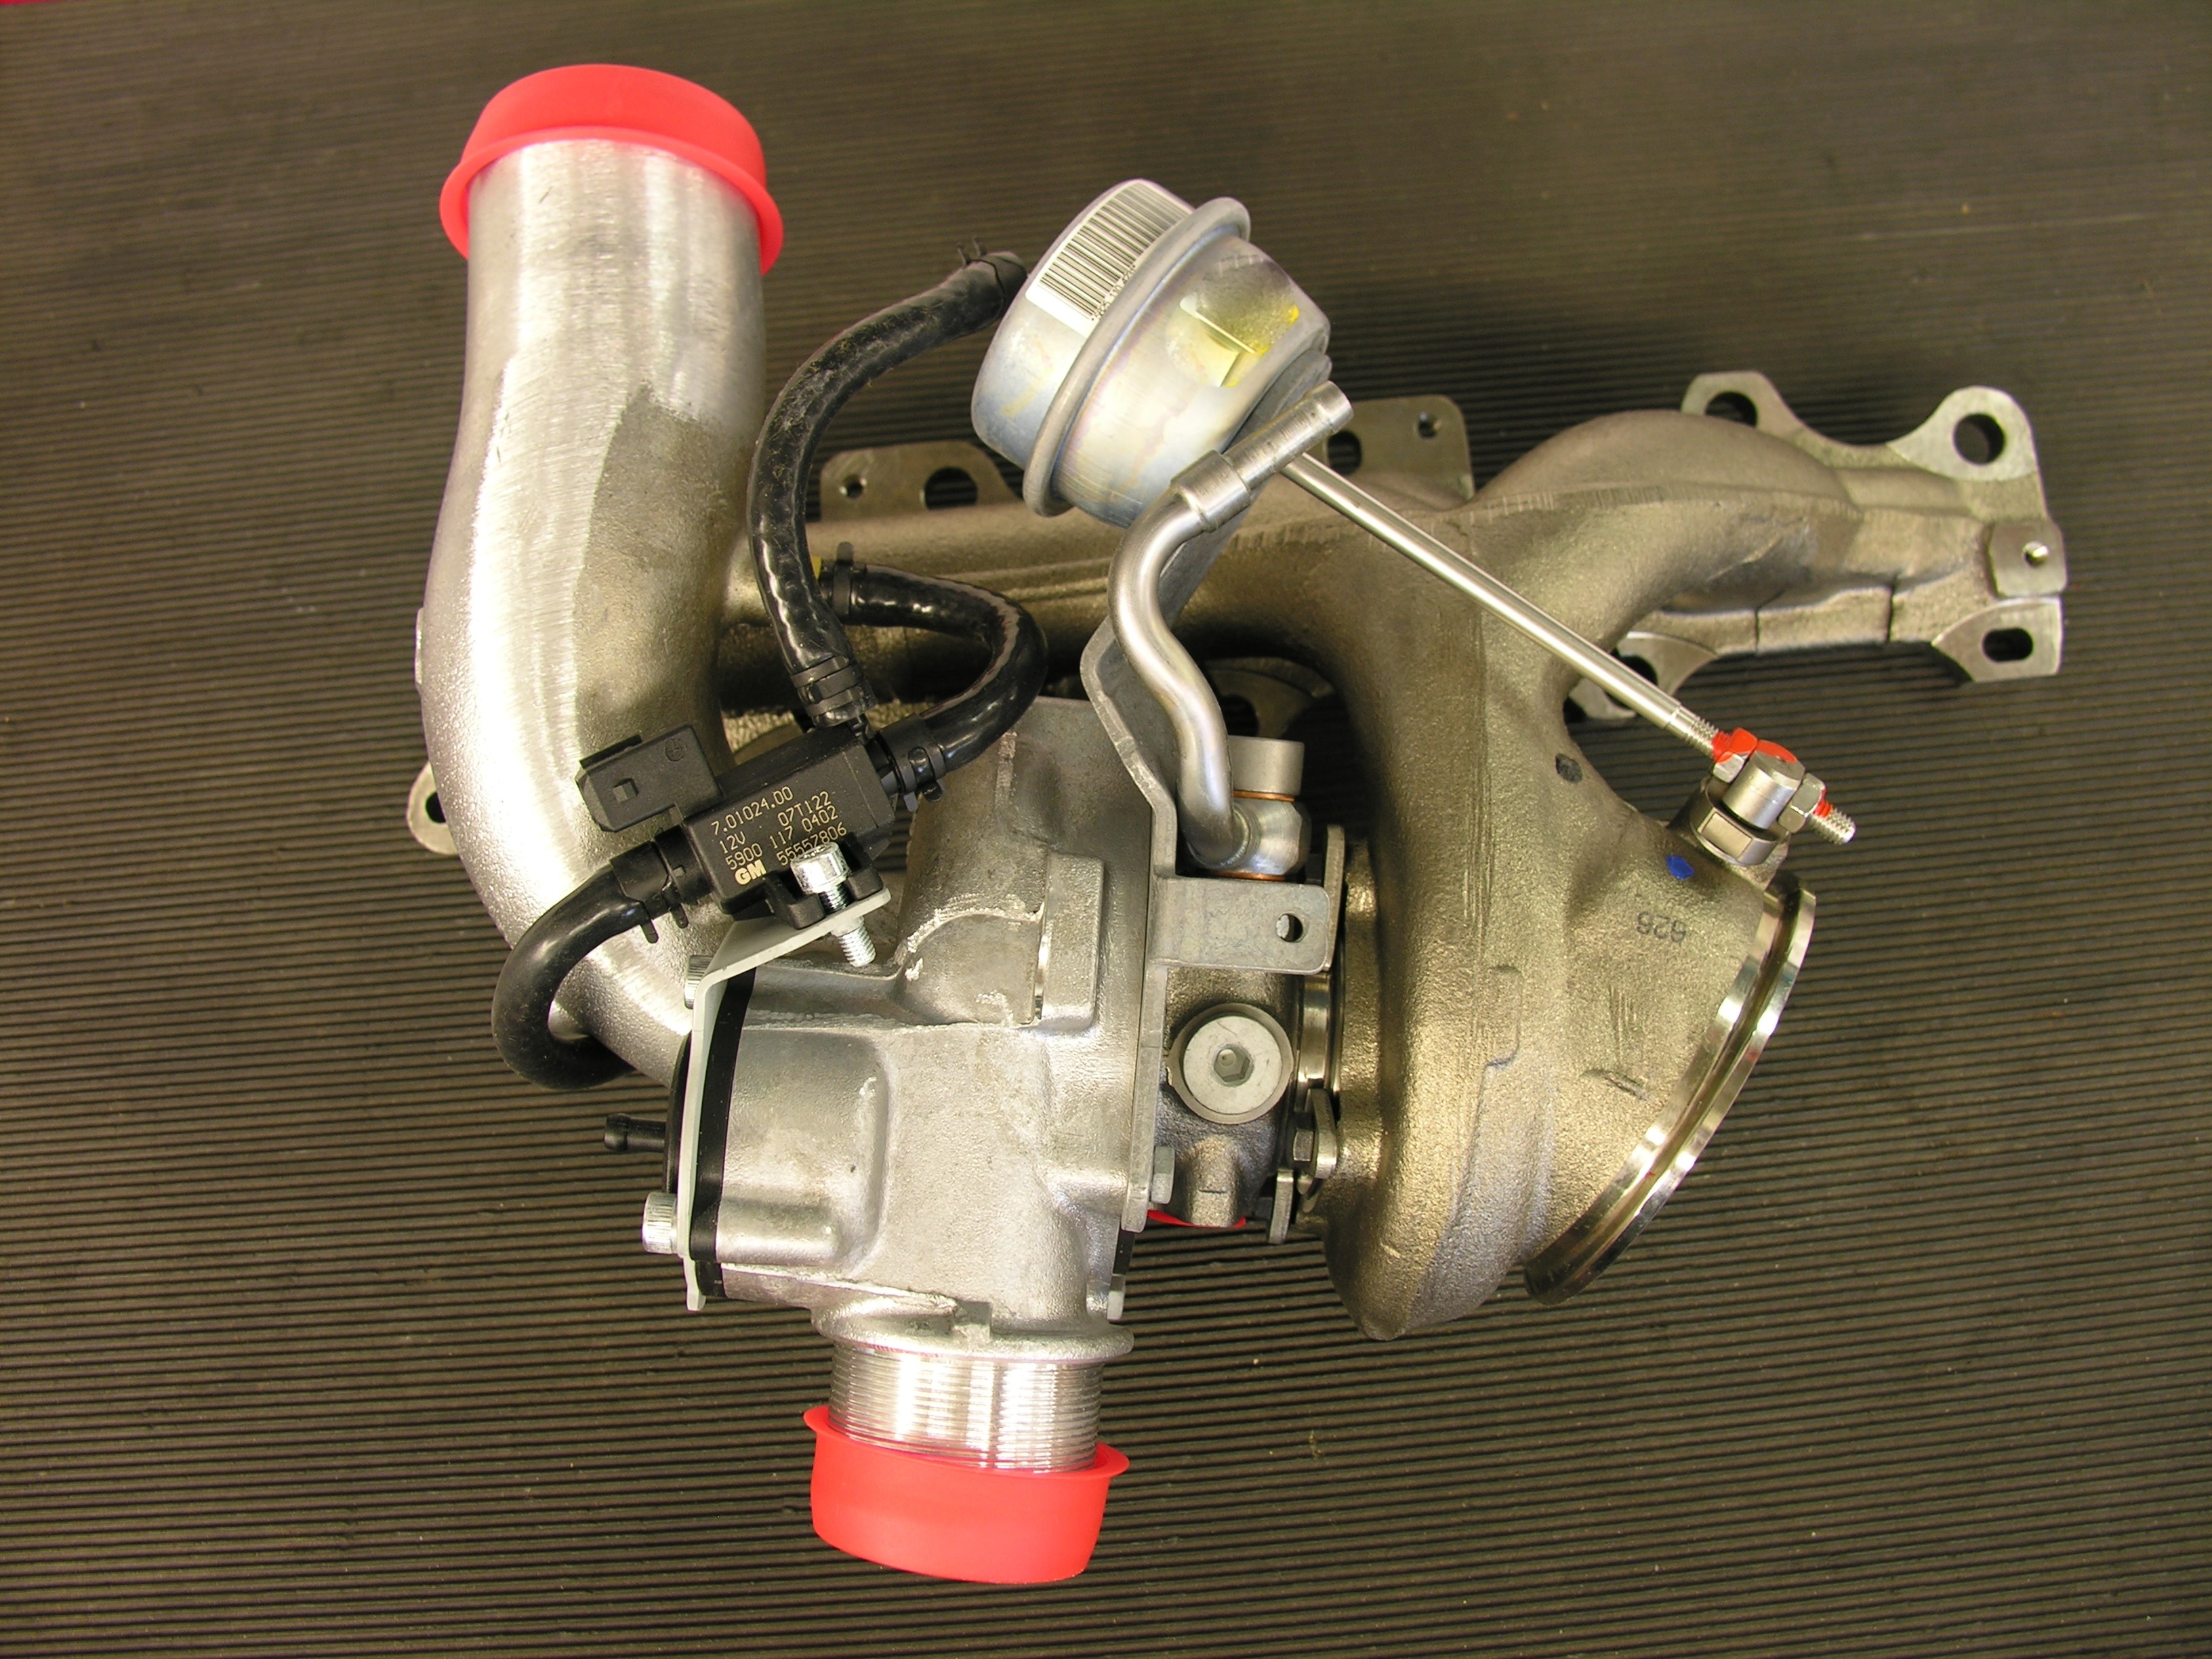 Manifold and turbocharger including Wastegate! from Z20LEH